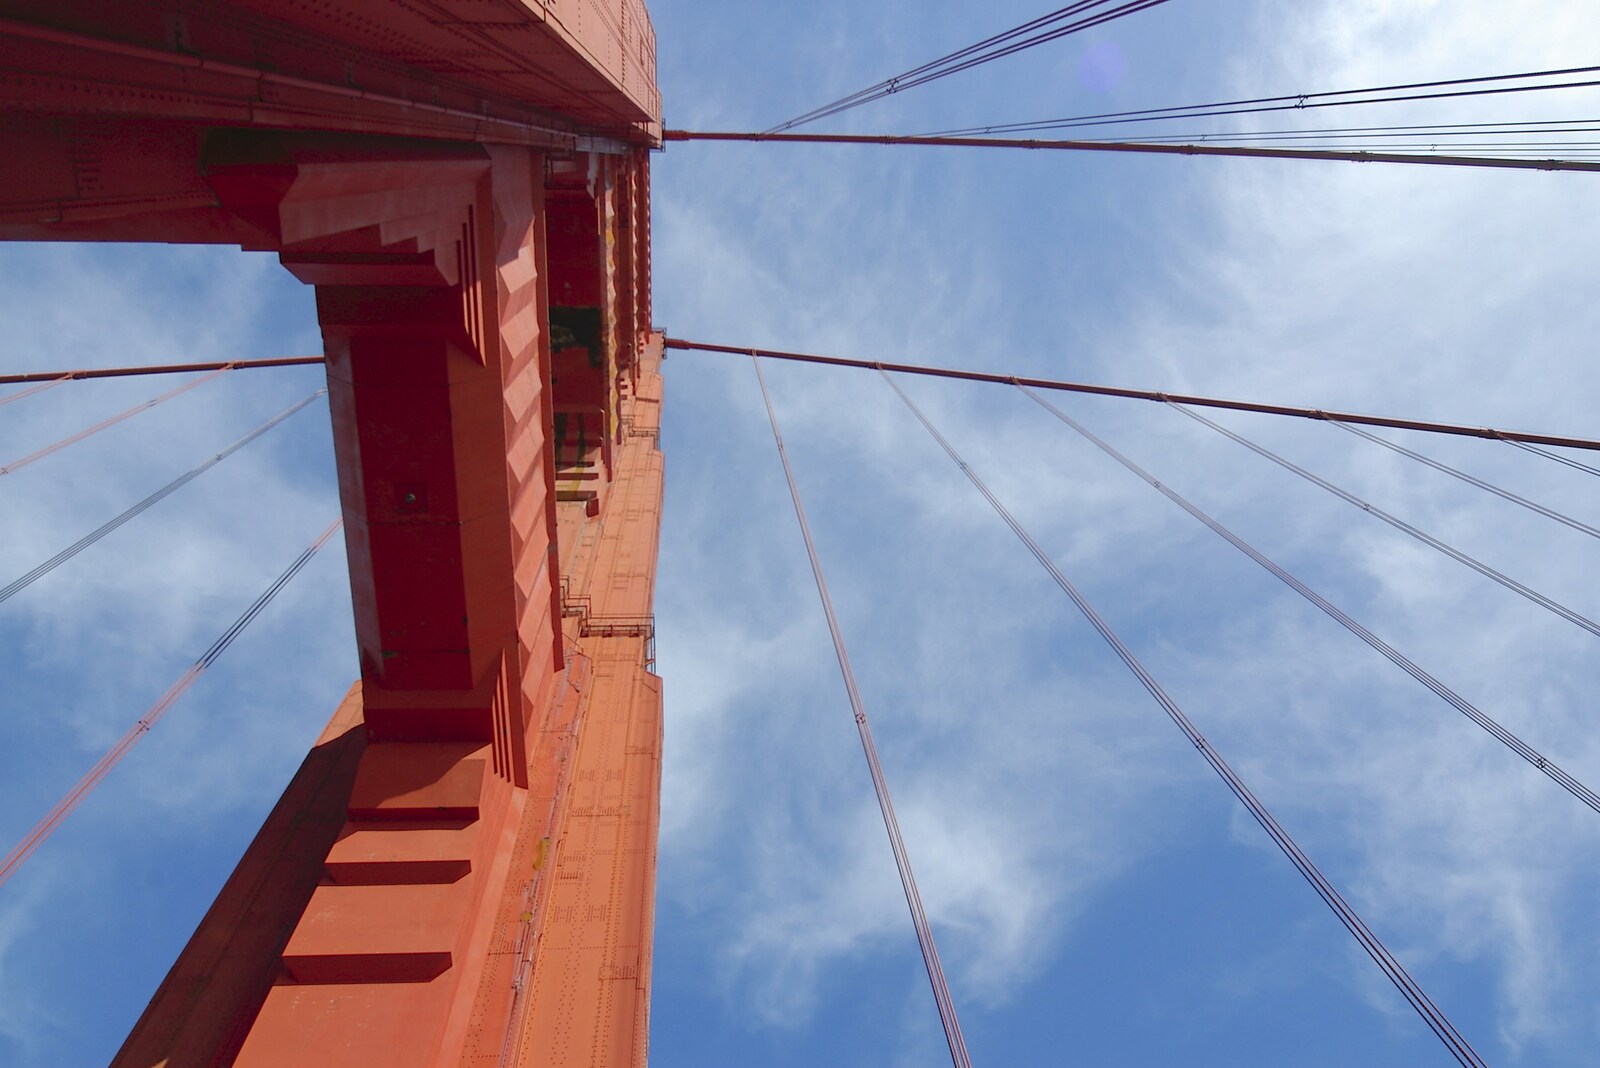 Looking straight up one of the towers from The Golden Gate Bridge, San Francisco, California, US - 11th March 2006